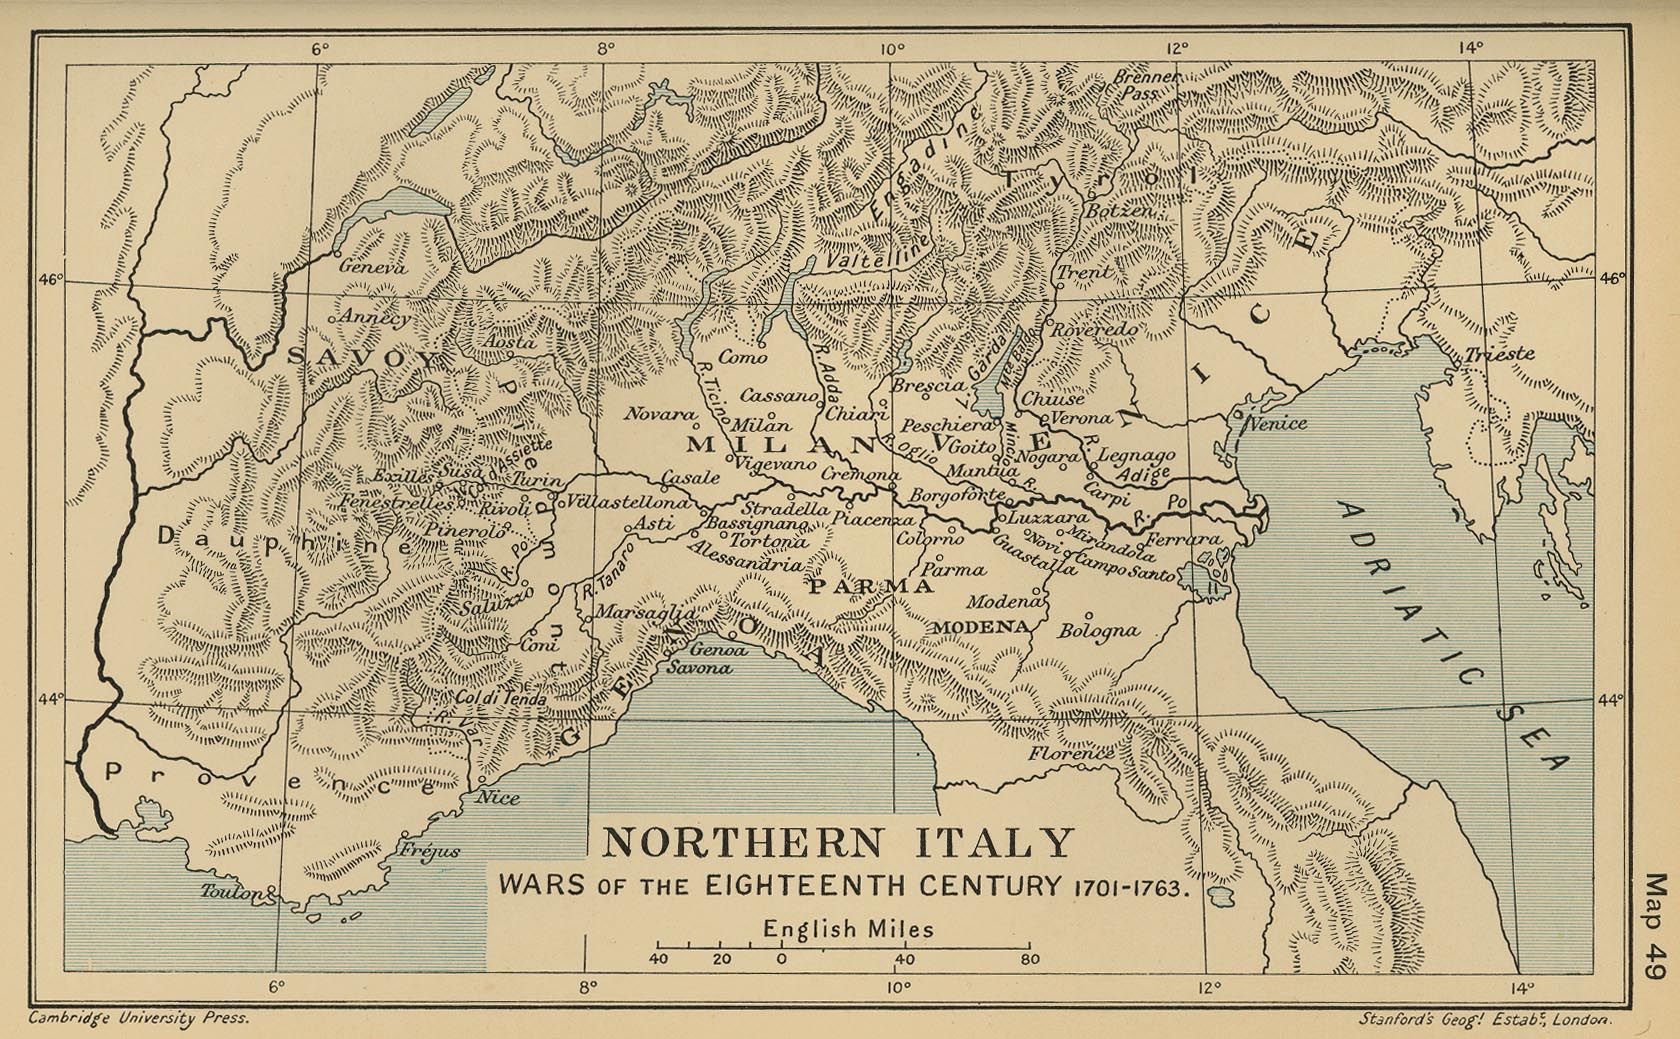 Map of Northern Italy 1701-1763